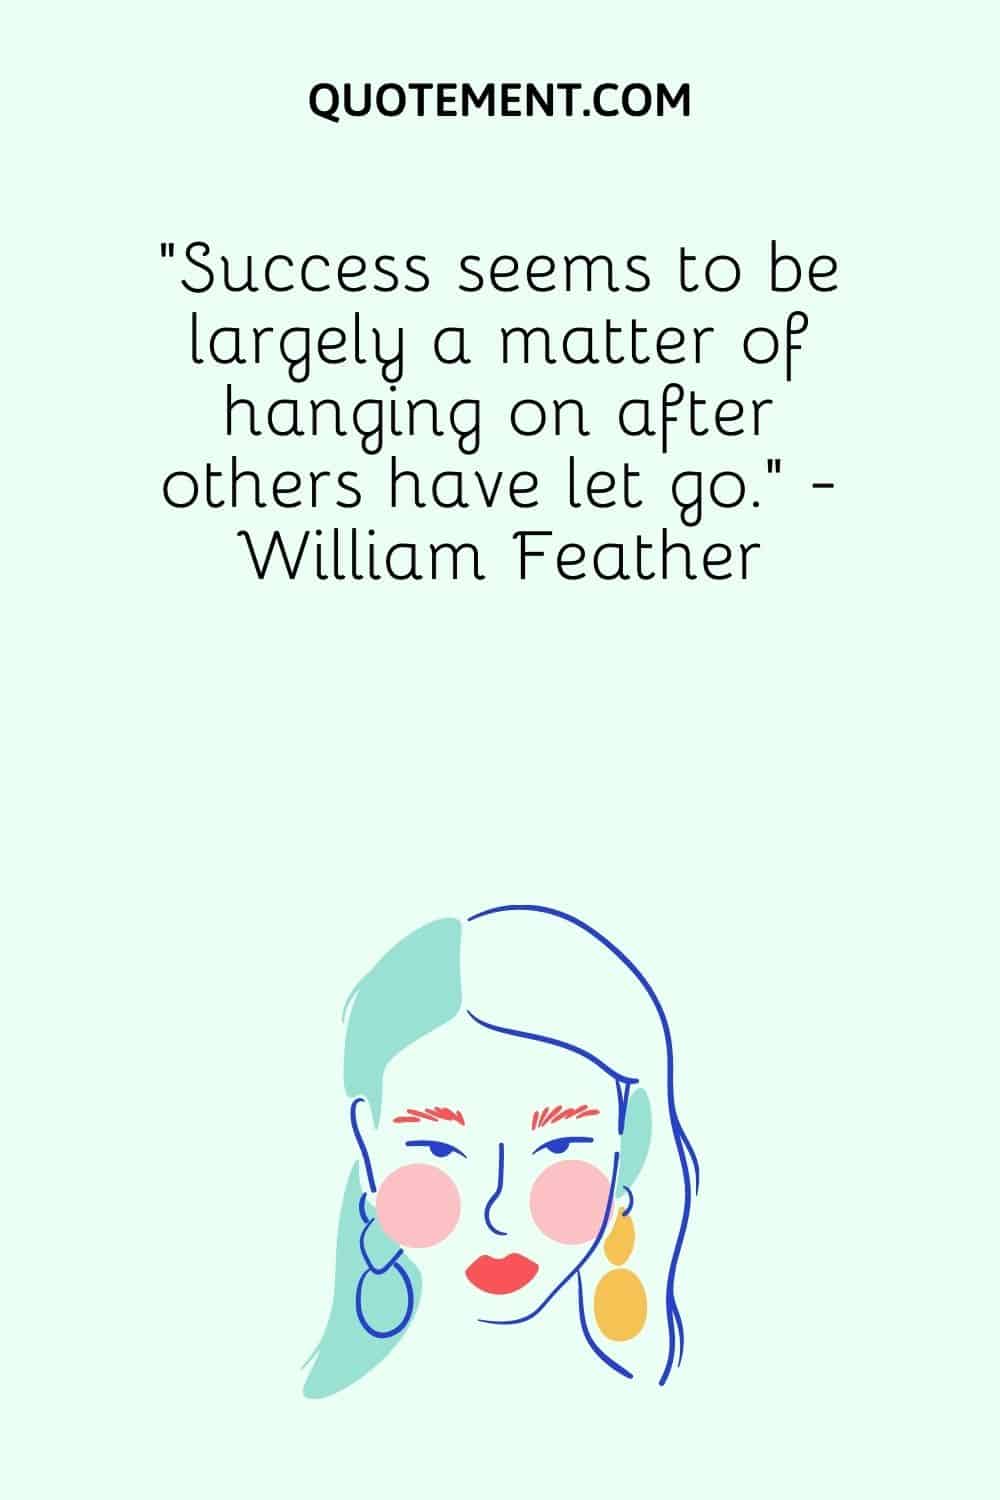 “Success seems to be largely a matter of hanging on after others have let go.” - William Feather